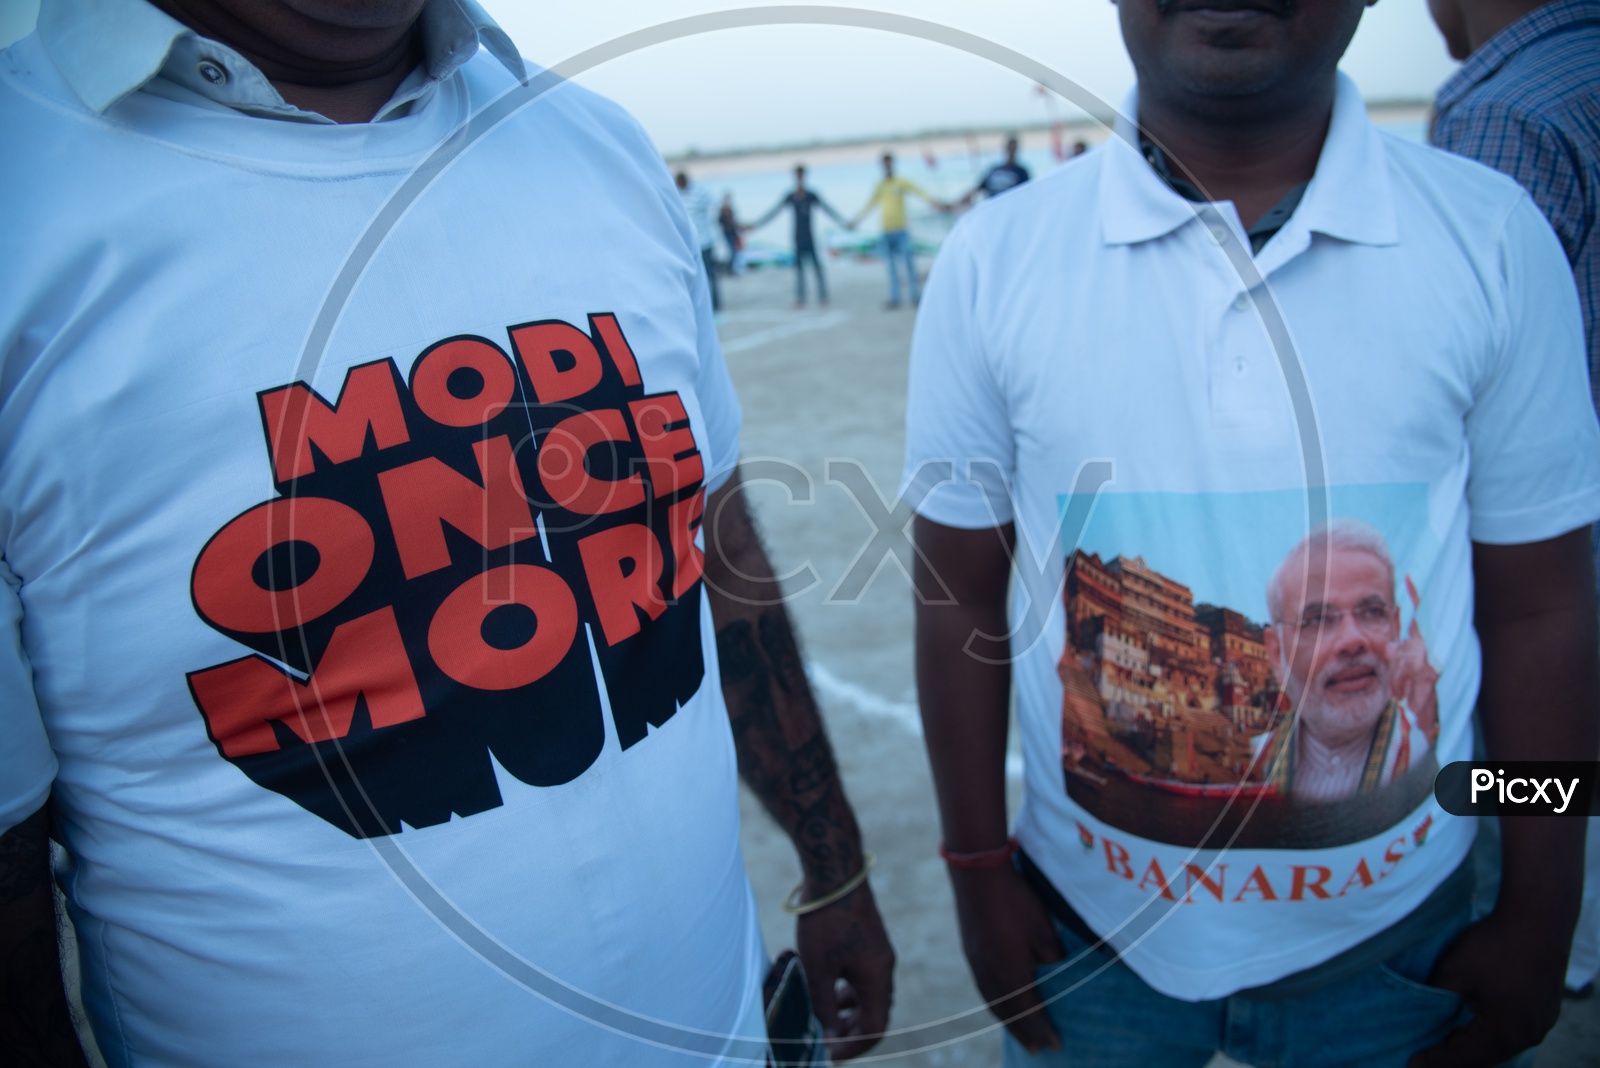 Modi Supporters Wearing Modi  Once More T-Shirts in Varanasi During Election Campaign of BJP